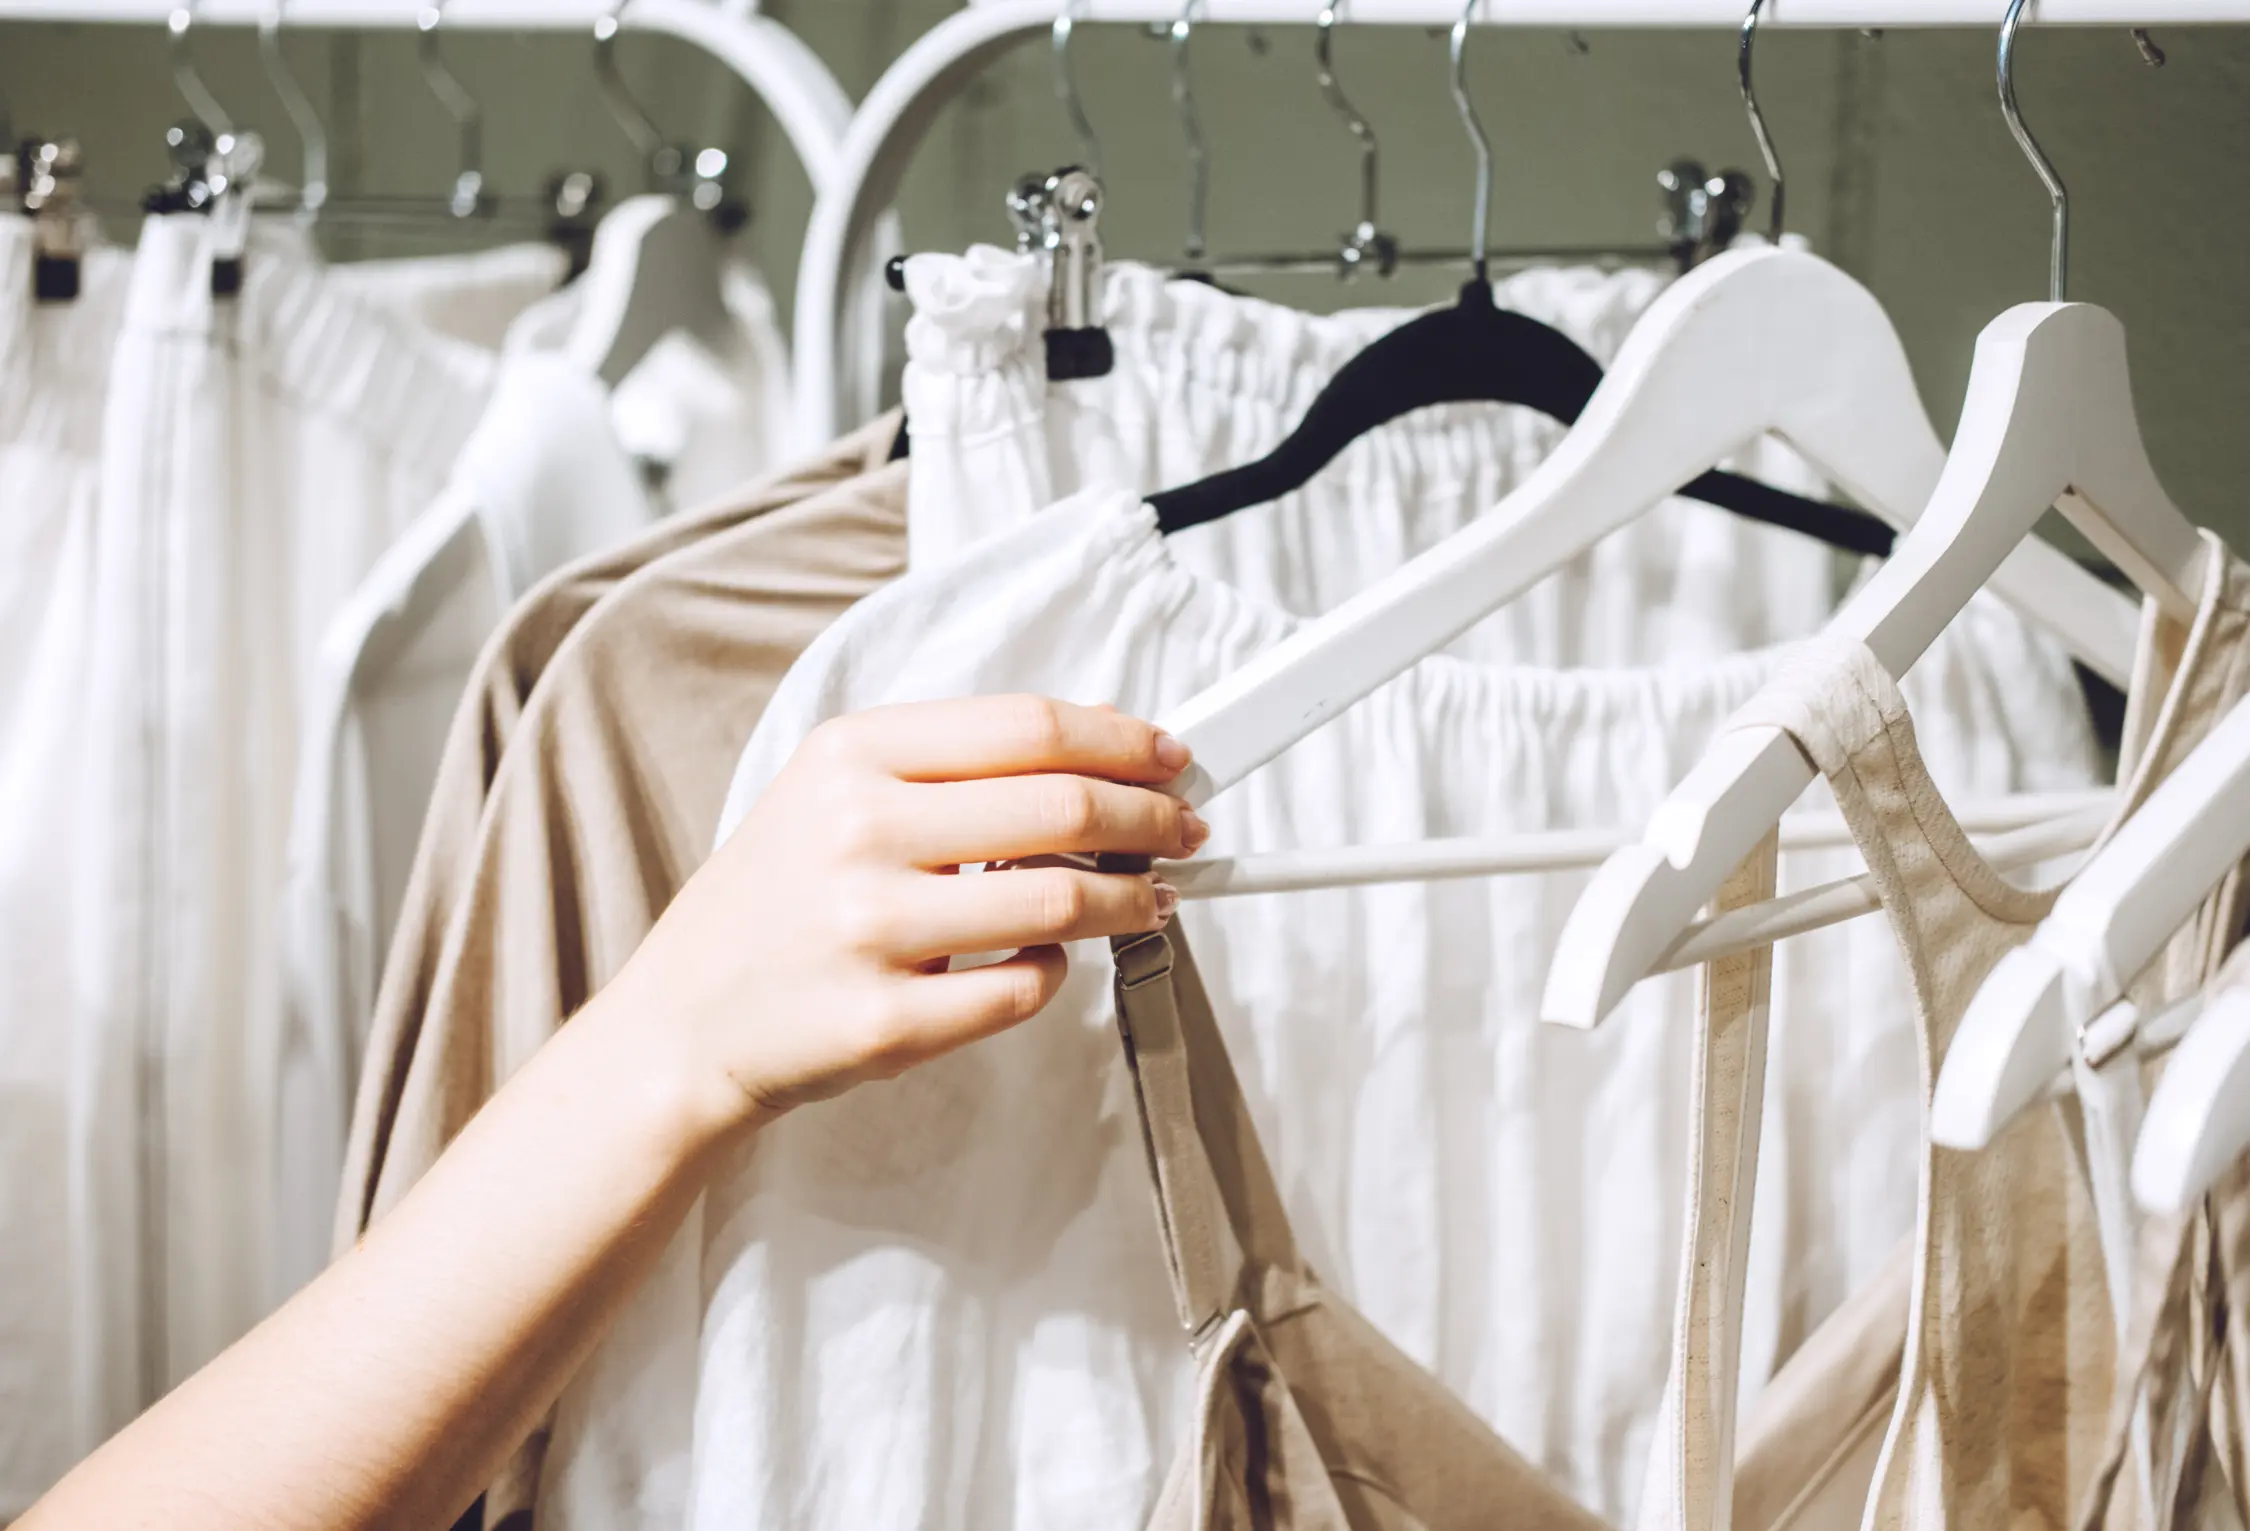 Image : Sustainable Fashion, clothes hanging on cloth hanger